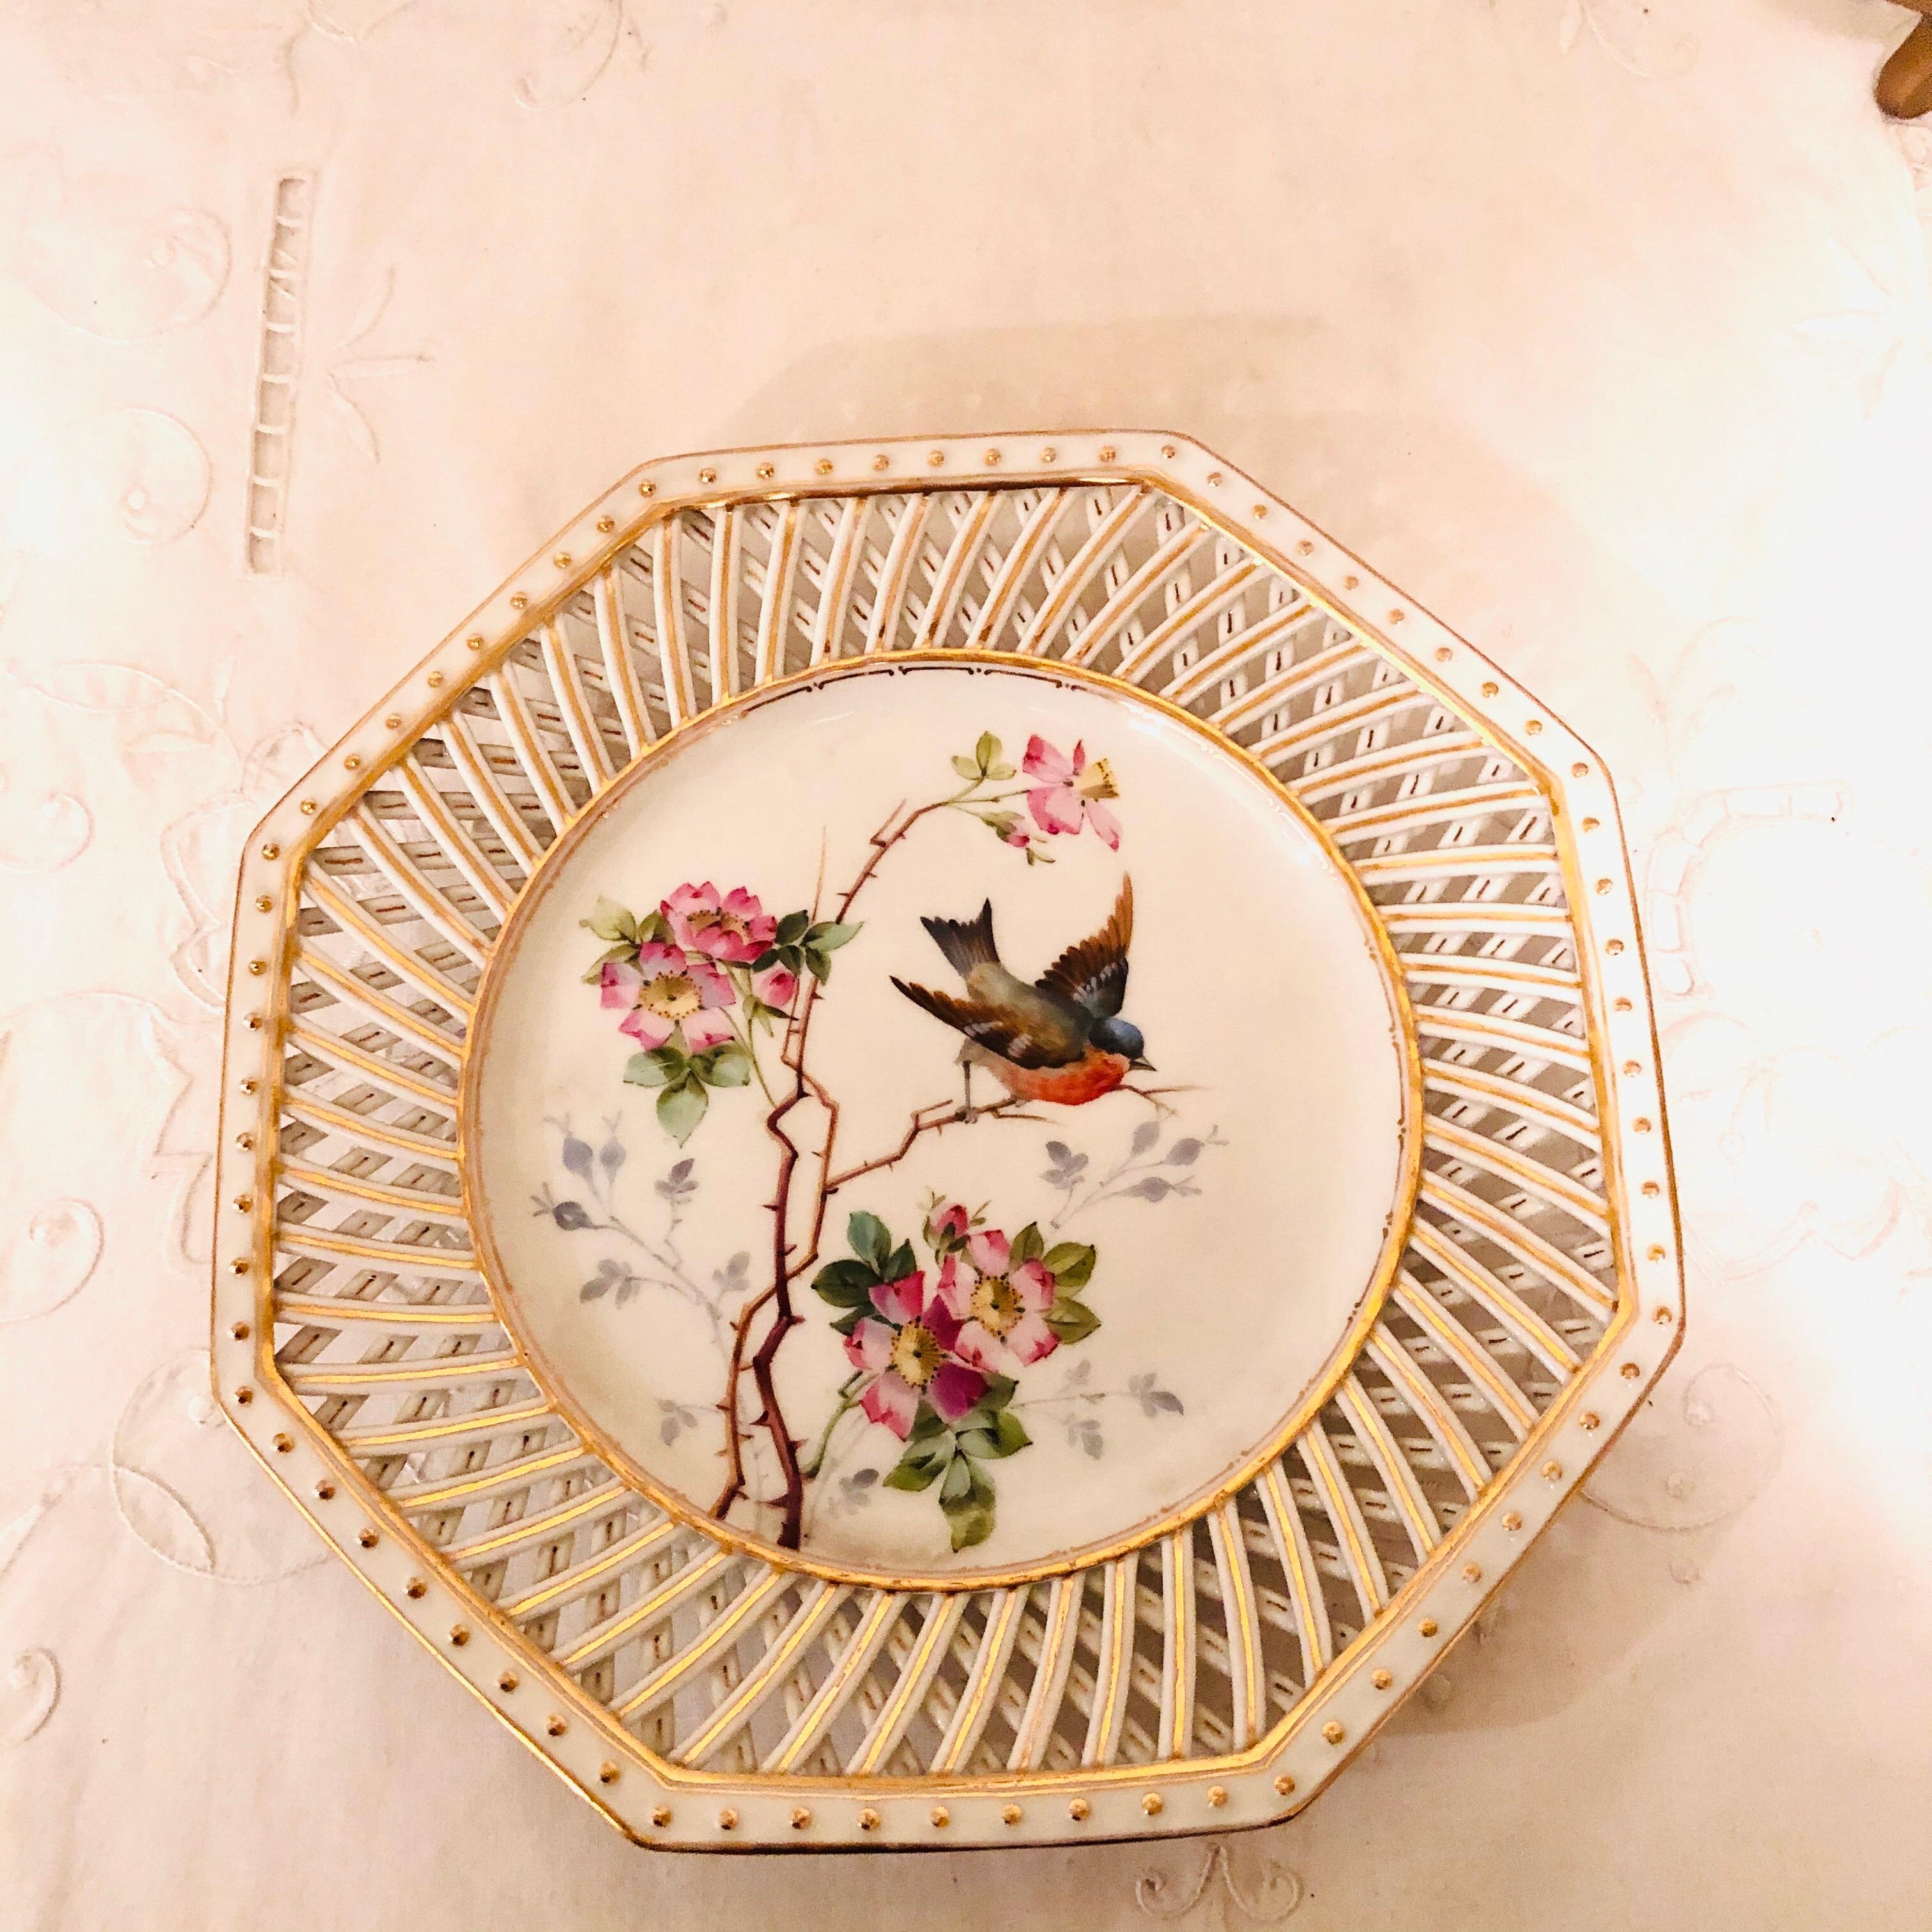 Set of twelve Pirkenhammer reticulated octagonal bird plates, each hand painted with different birds in their natural habitat. The paintings of the birds, flowers and leaves are influenced by the aesthetic movement. Around the octagonal border of